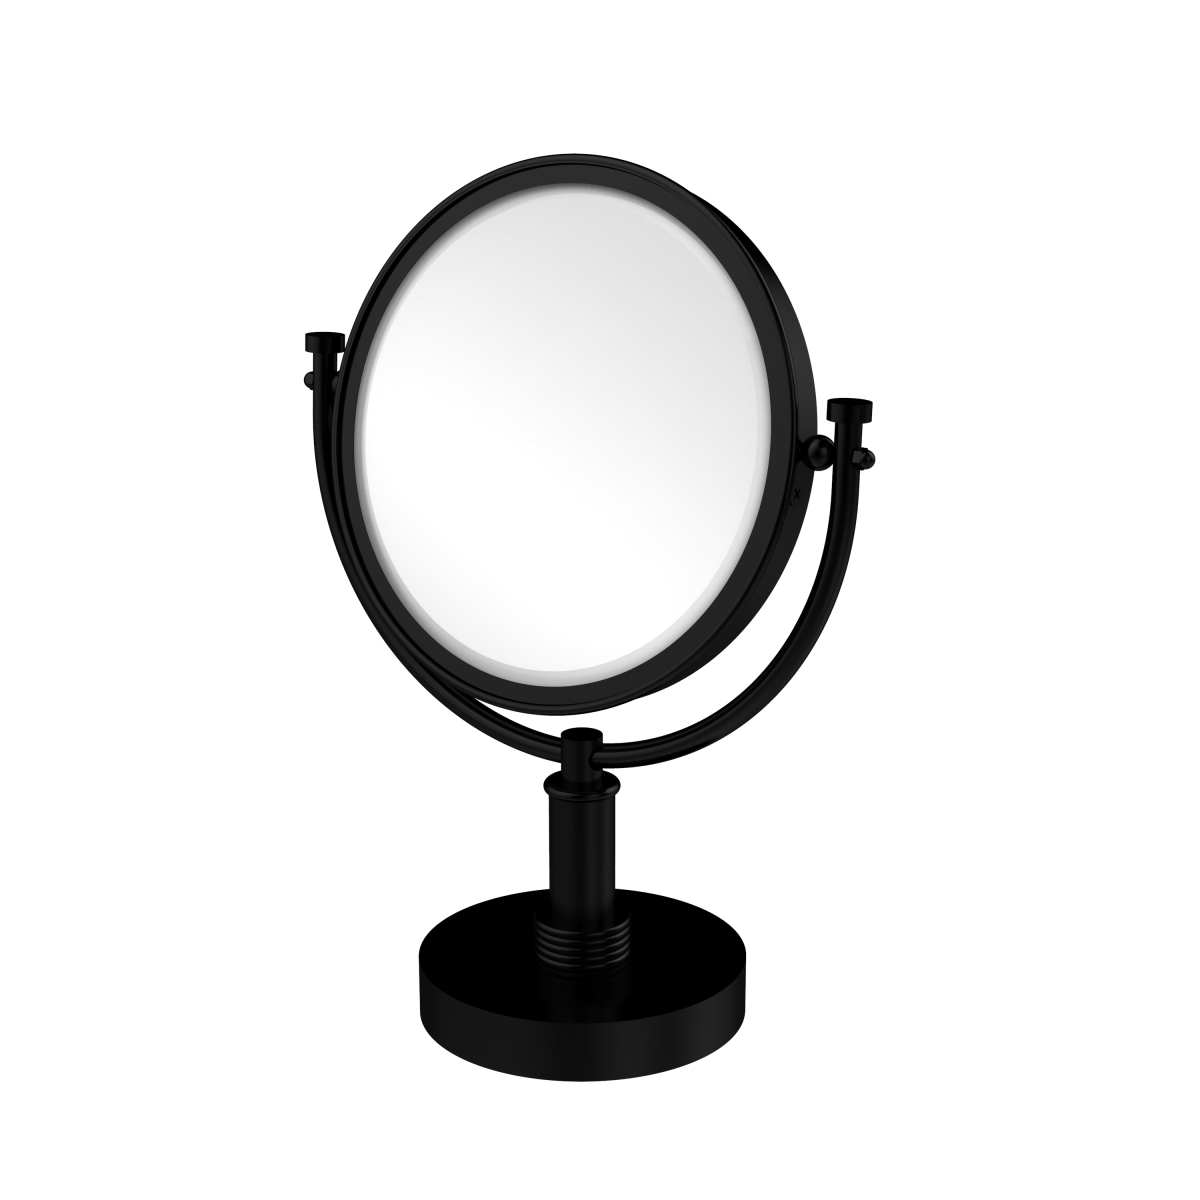 Picture of Allied Brass DM-4G-2X-BKM Grooved Ring Style 8 in. Vanity Top Make-Up Mirror 2X Magnification, Matte Black